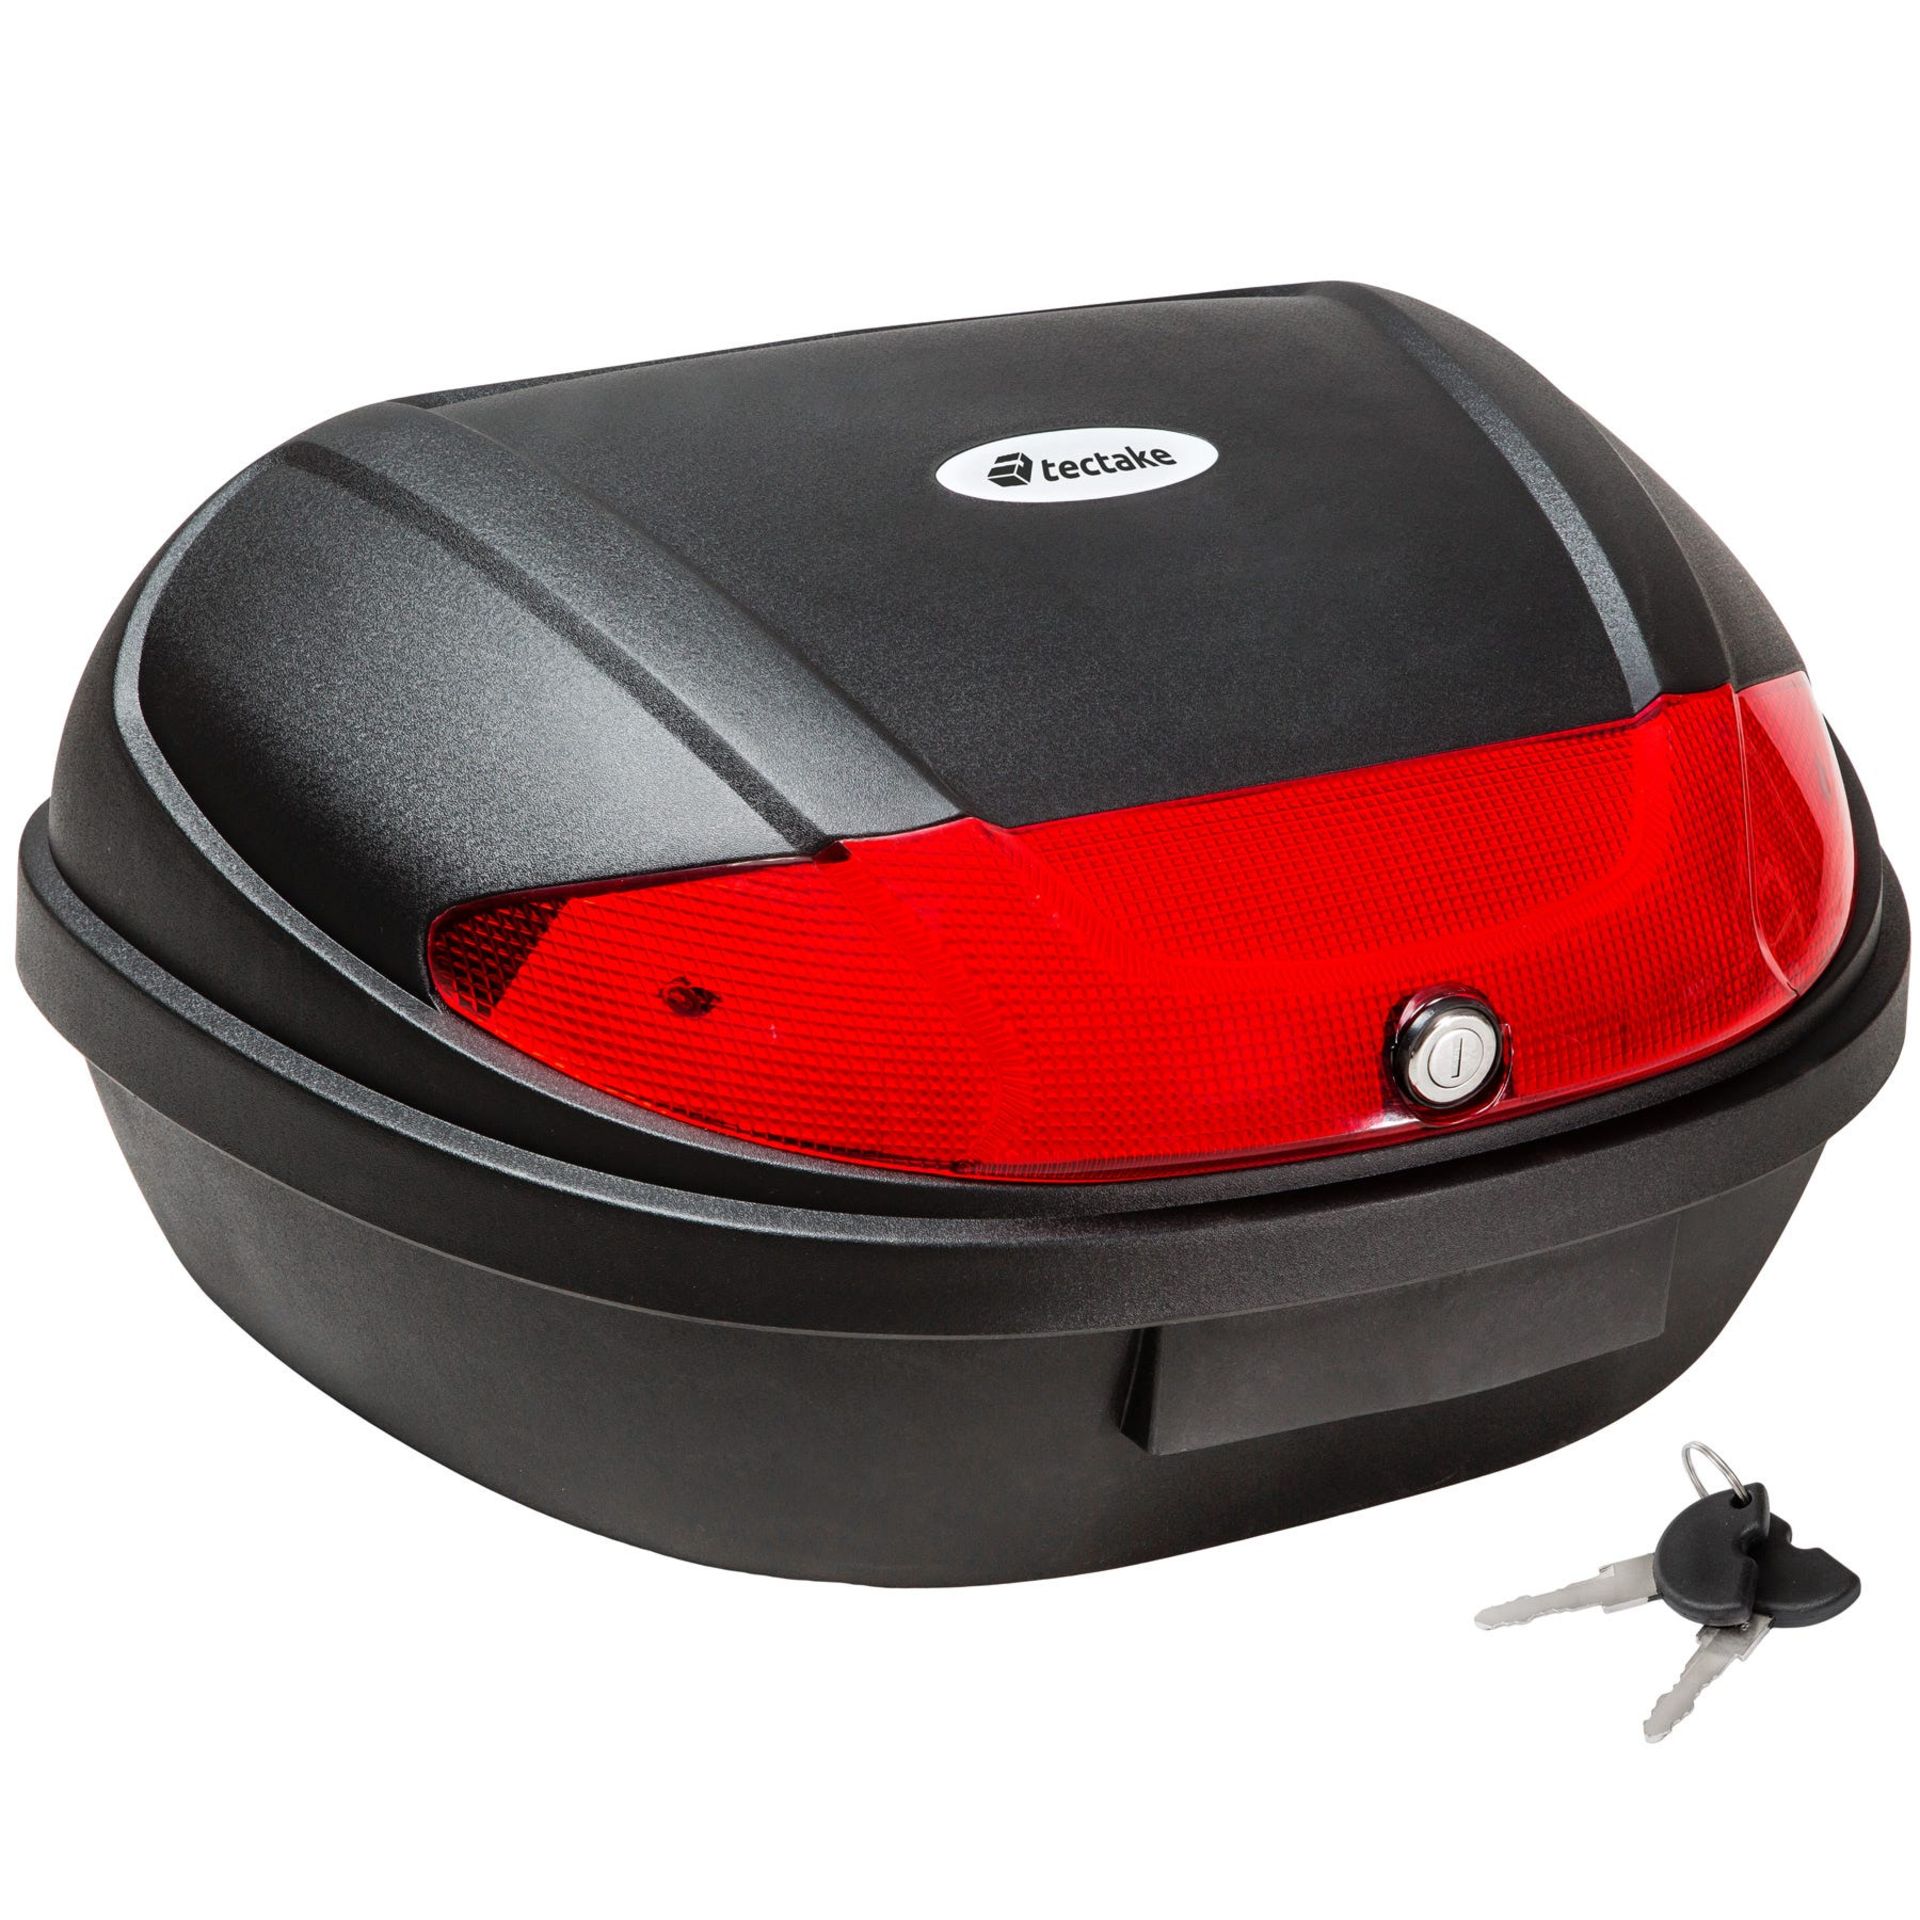 Tectake - Top Box For Motorcycle Approx. 48 Litres Black - Boxed. RRP £53.99 - Image 2 of 2